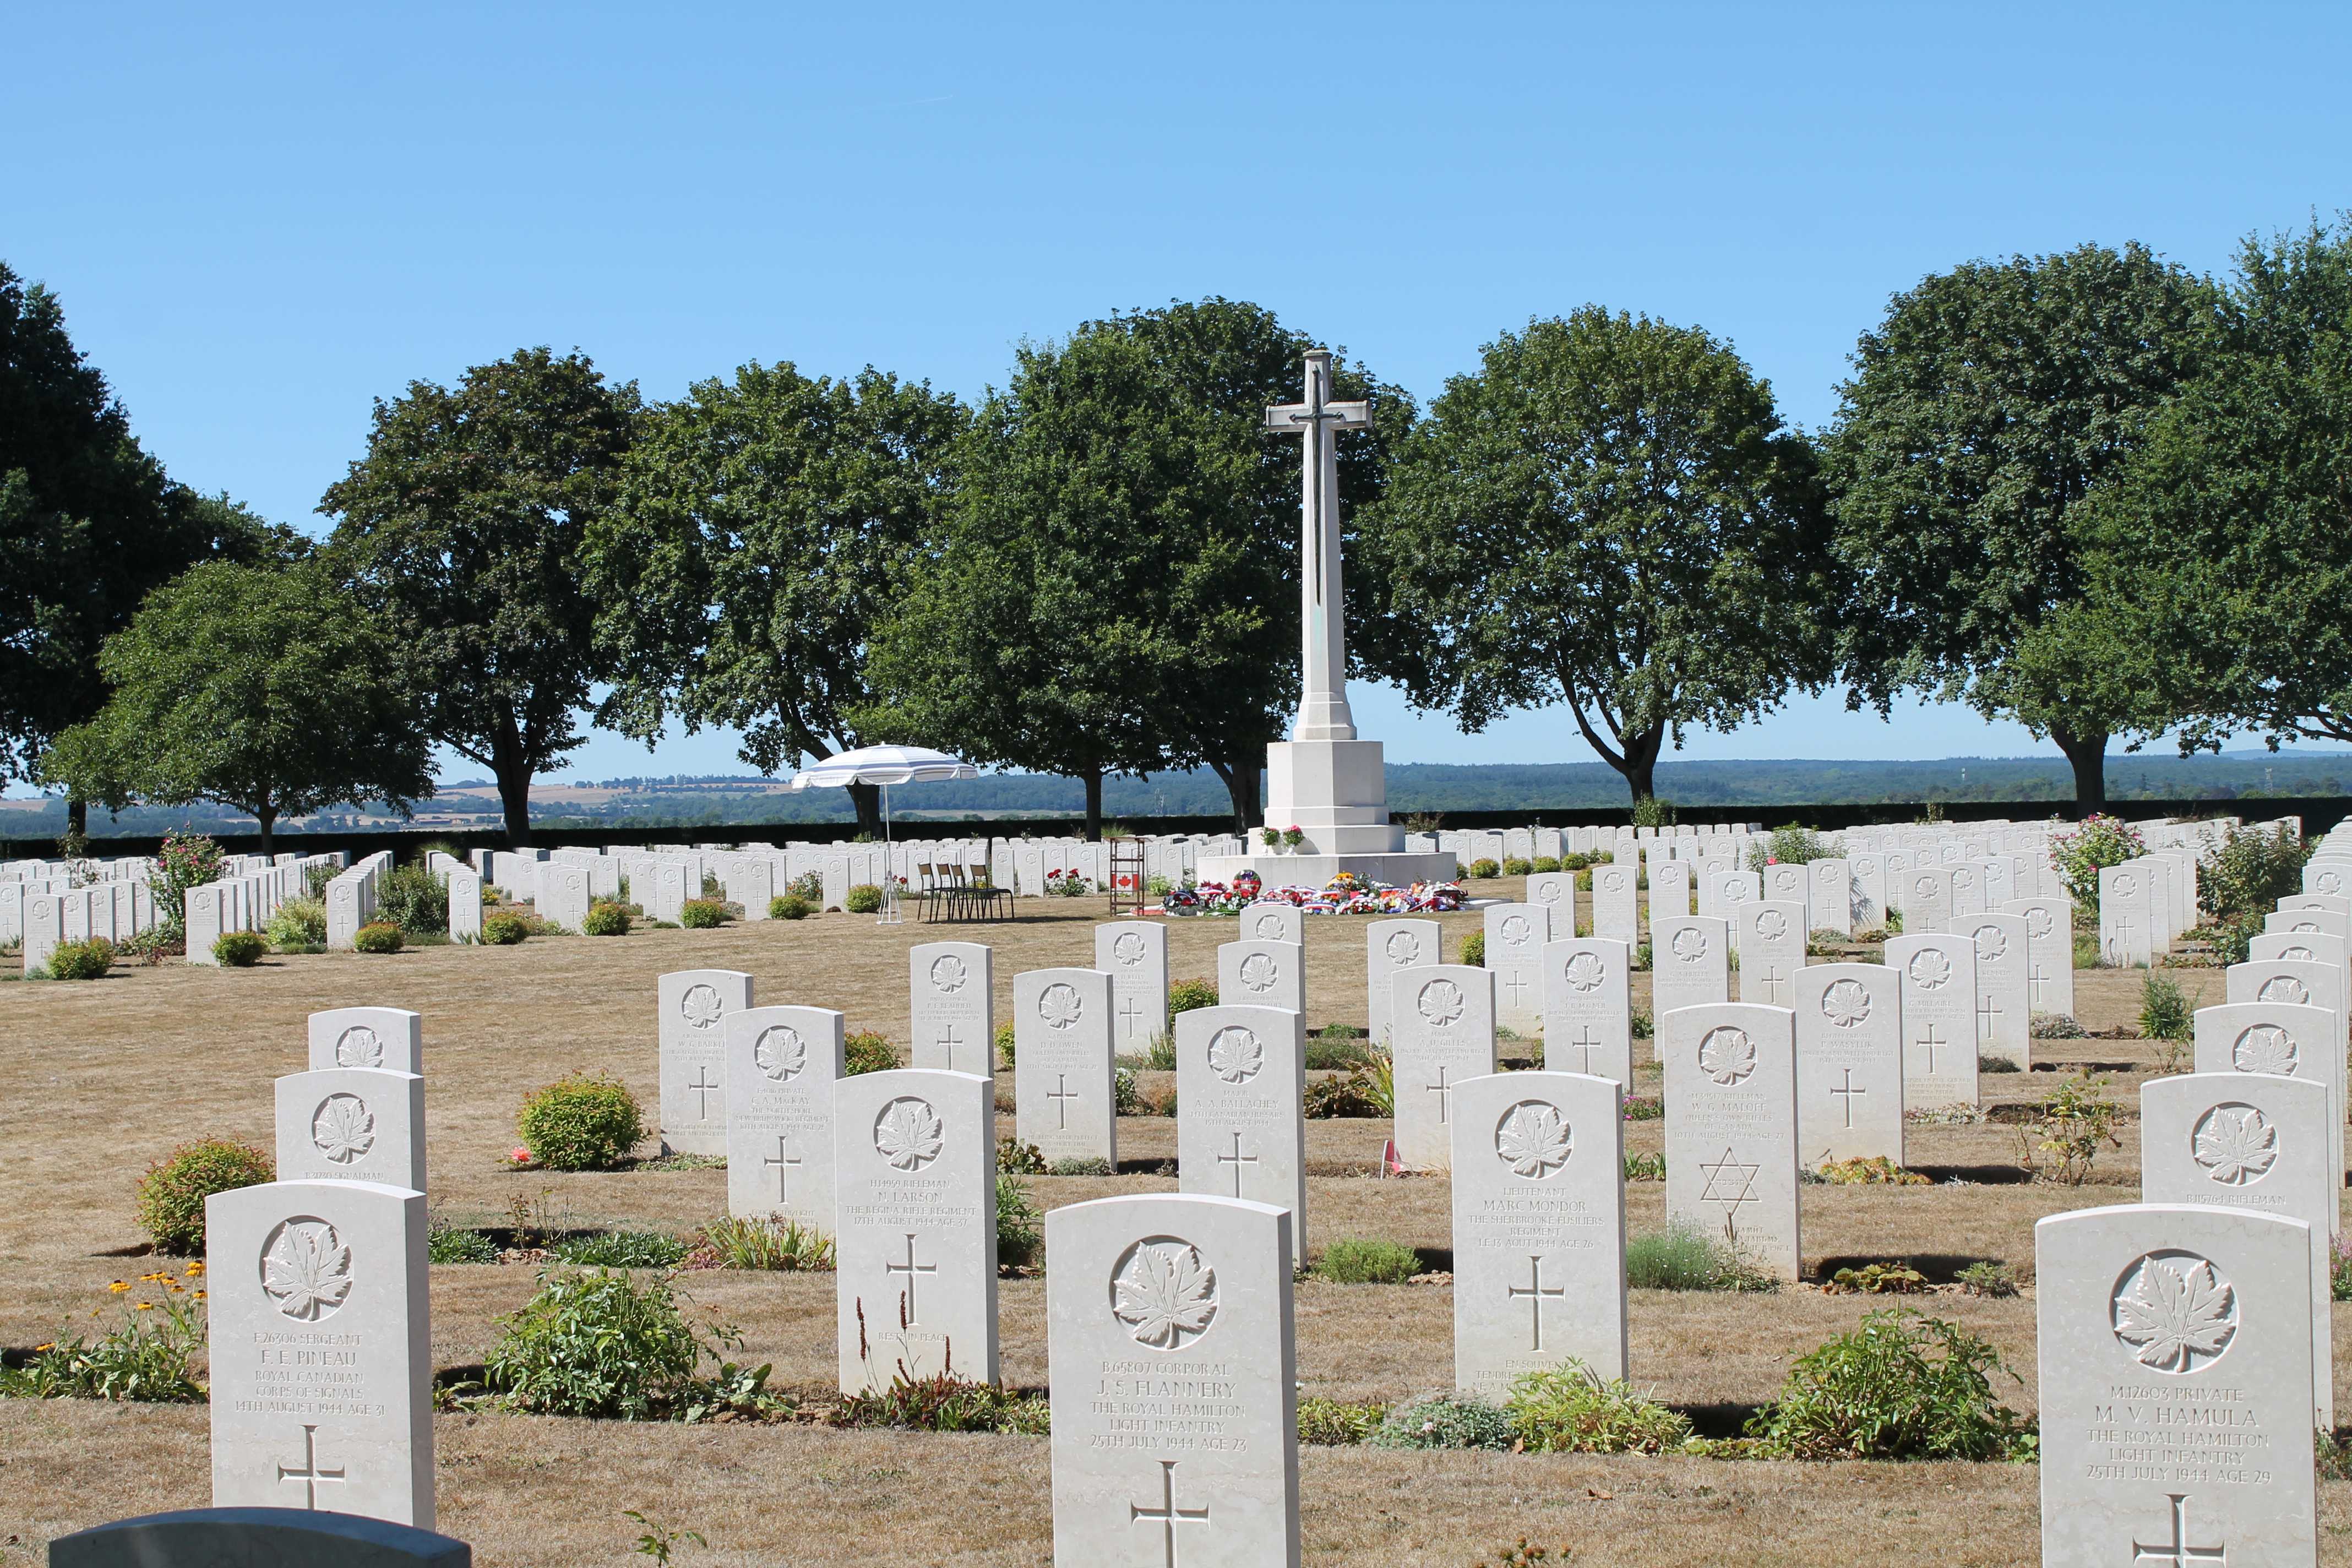 Colour photograph. A view of a military cemetery with uniform white gravestones. The iconic Commonwealth War Graves marble cross is in the centre. A podium from an earlier ceremony remains.